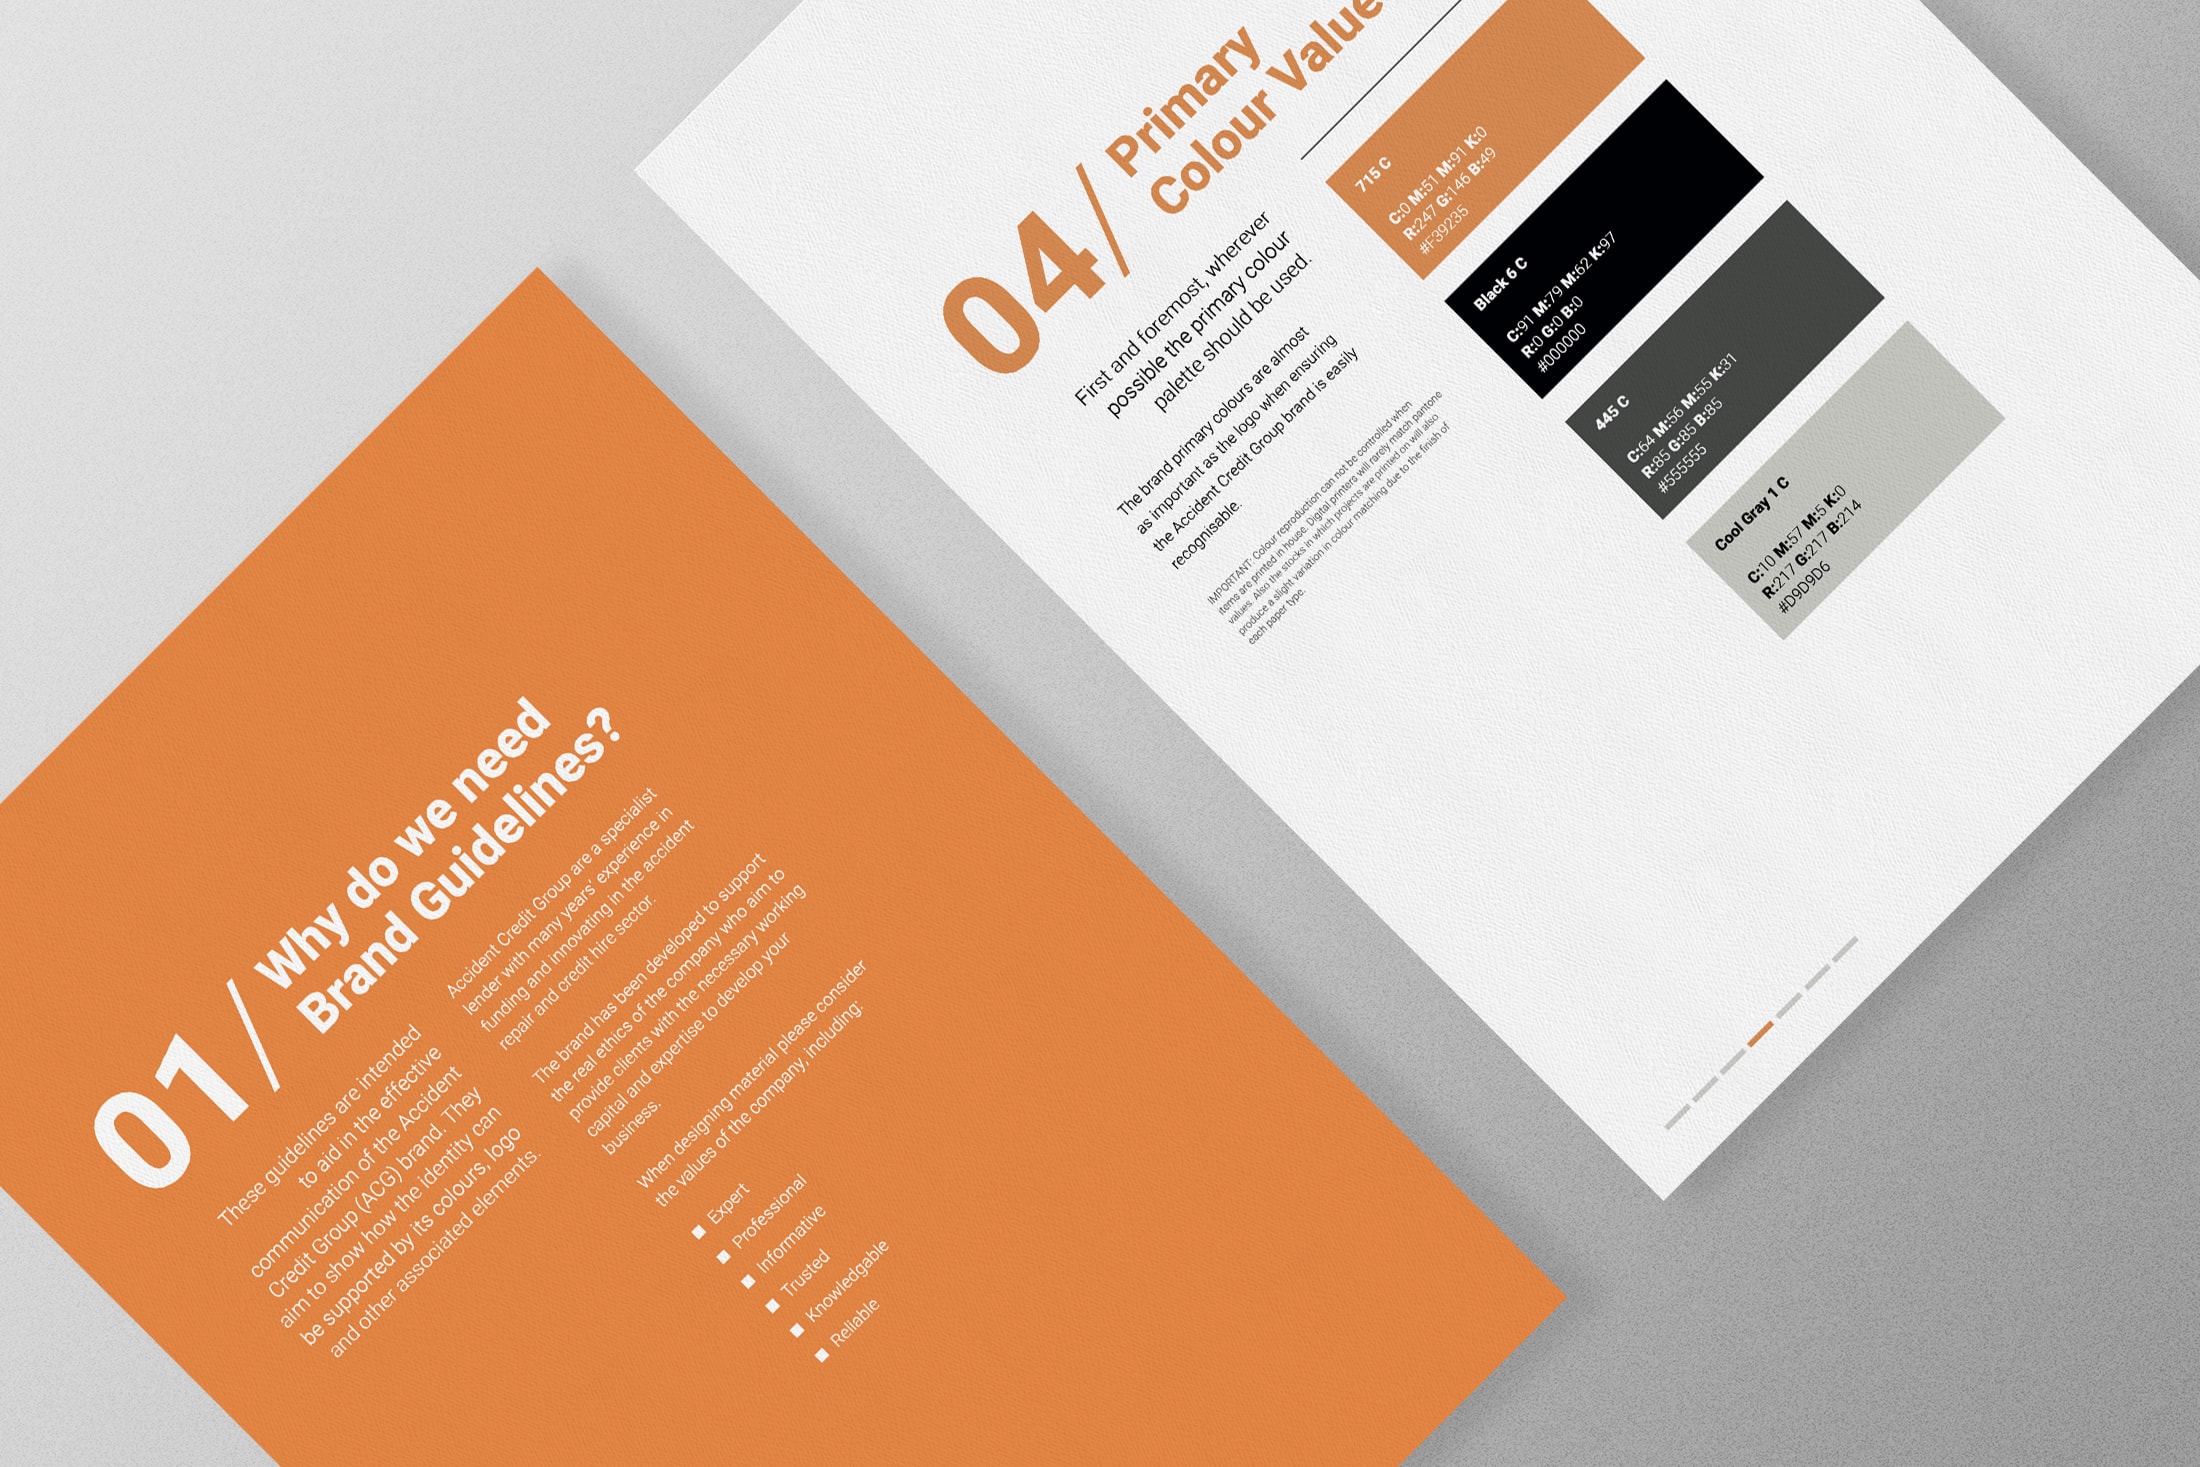 Accident Credit Group | Brand Guidelines